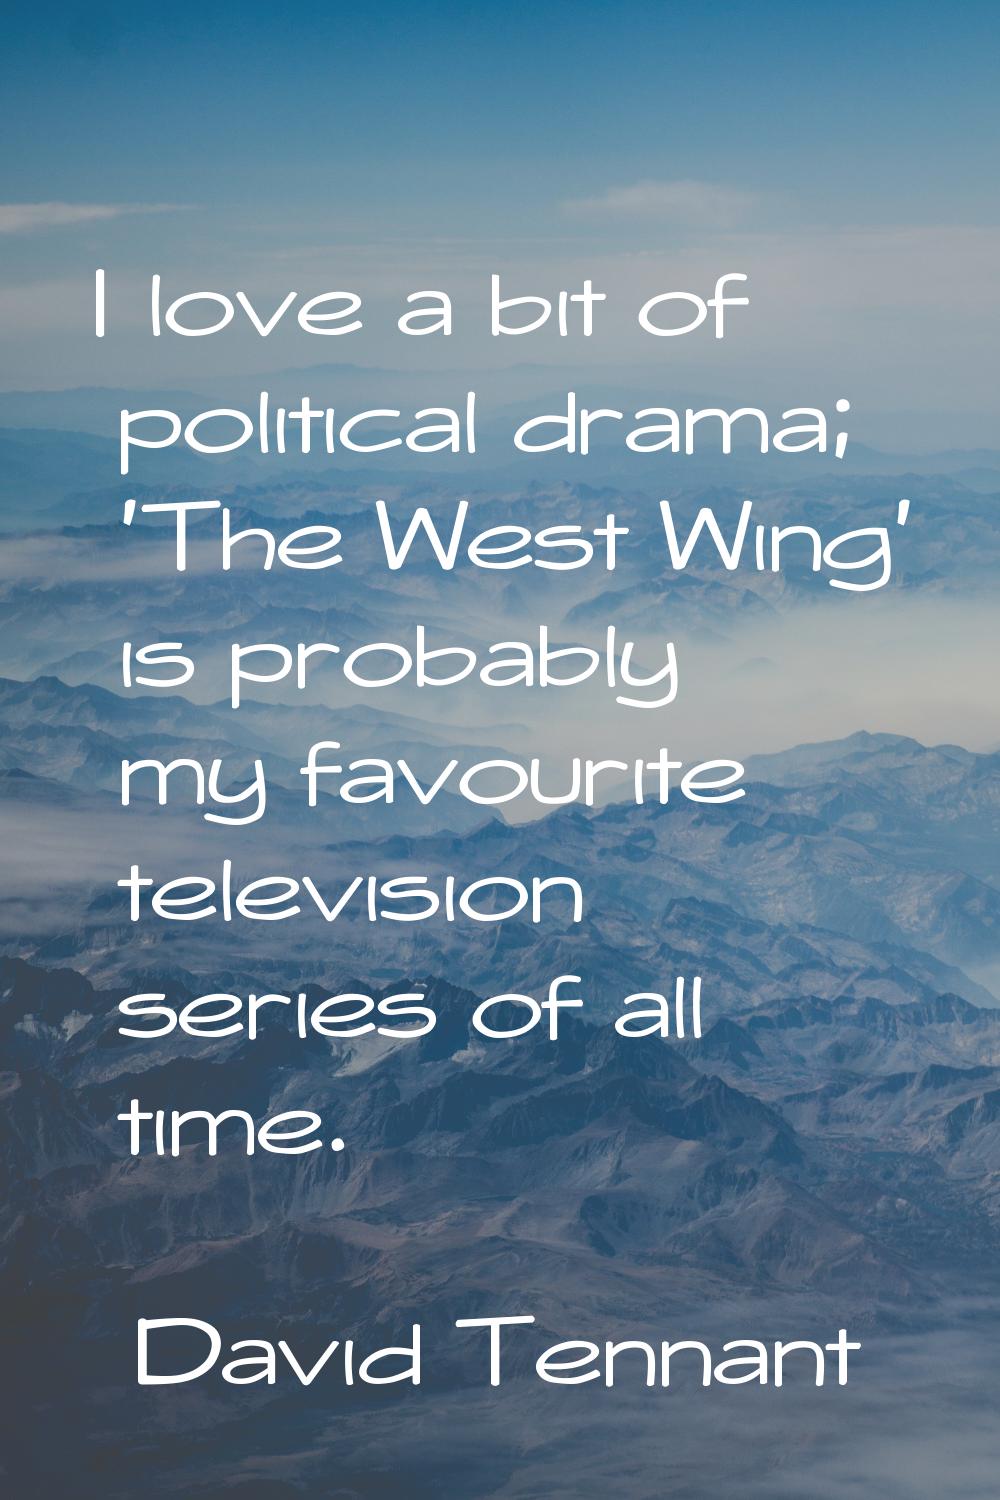 I love a bit of political drama; 'The West Wing' is probably my favourite television series of all 